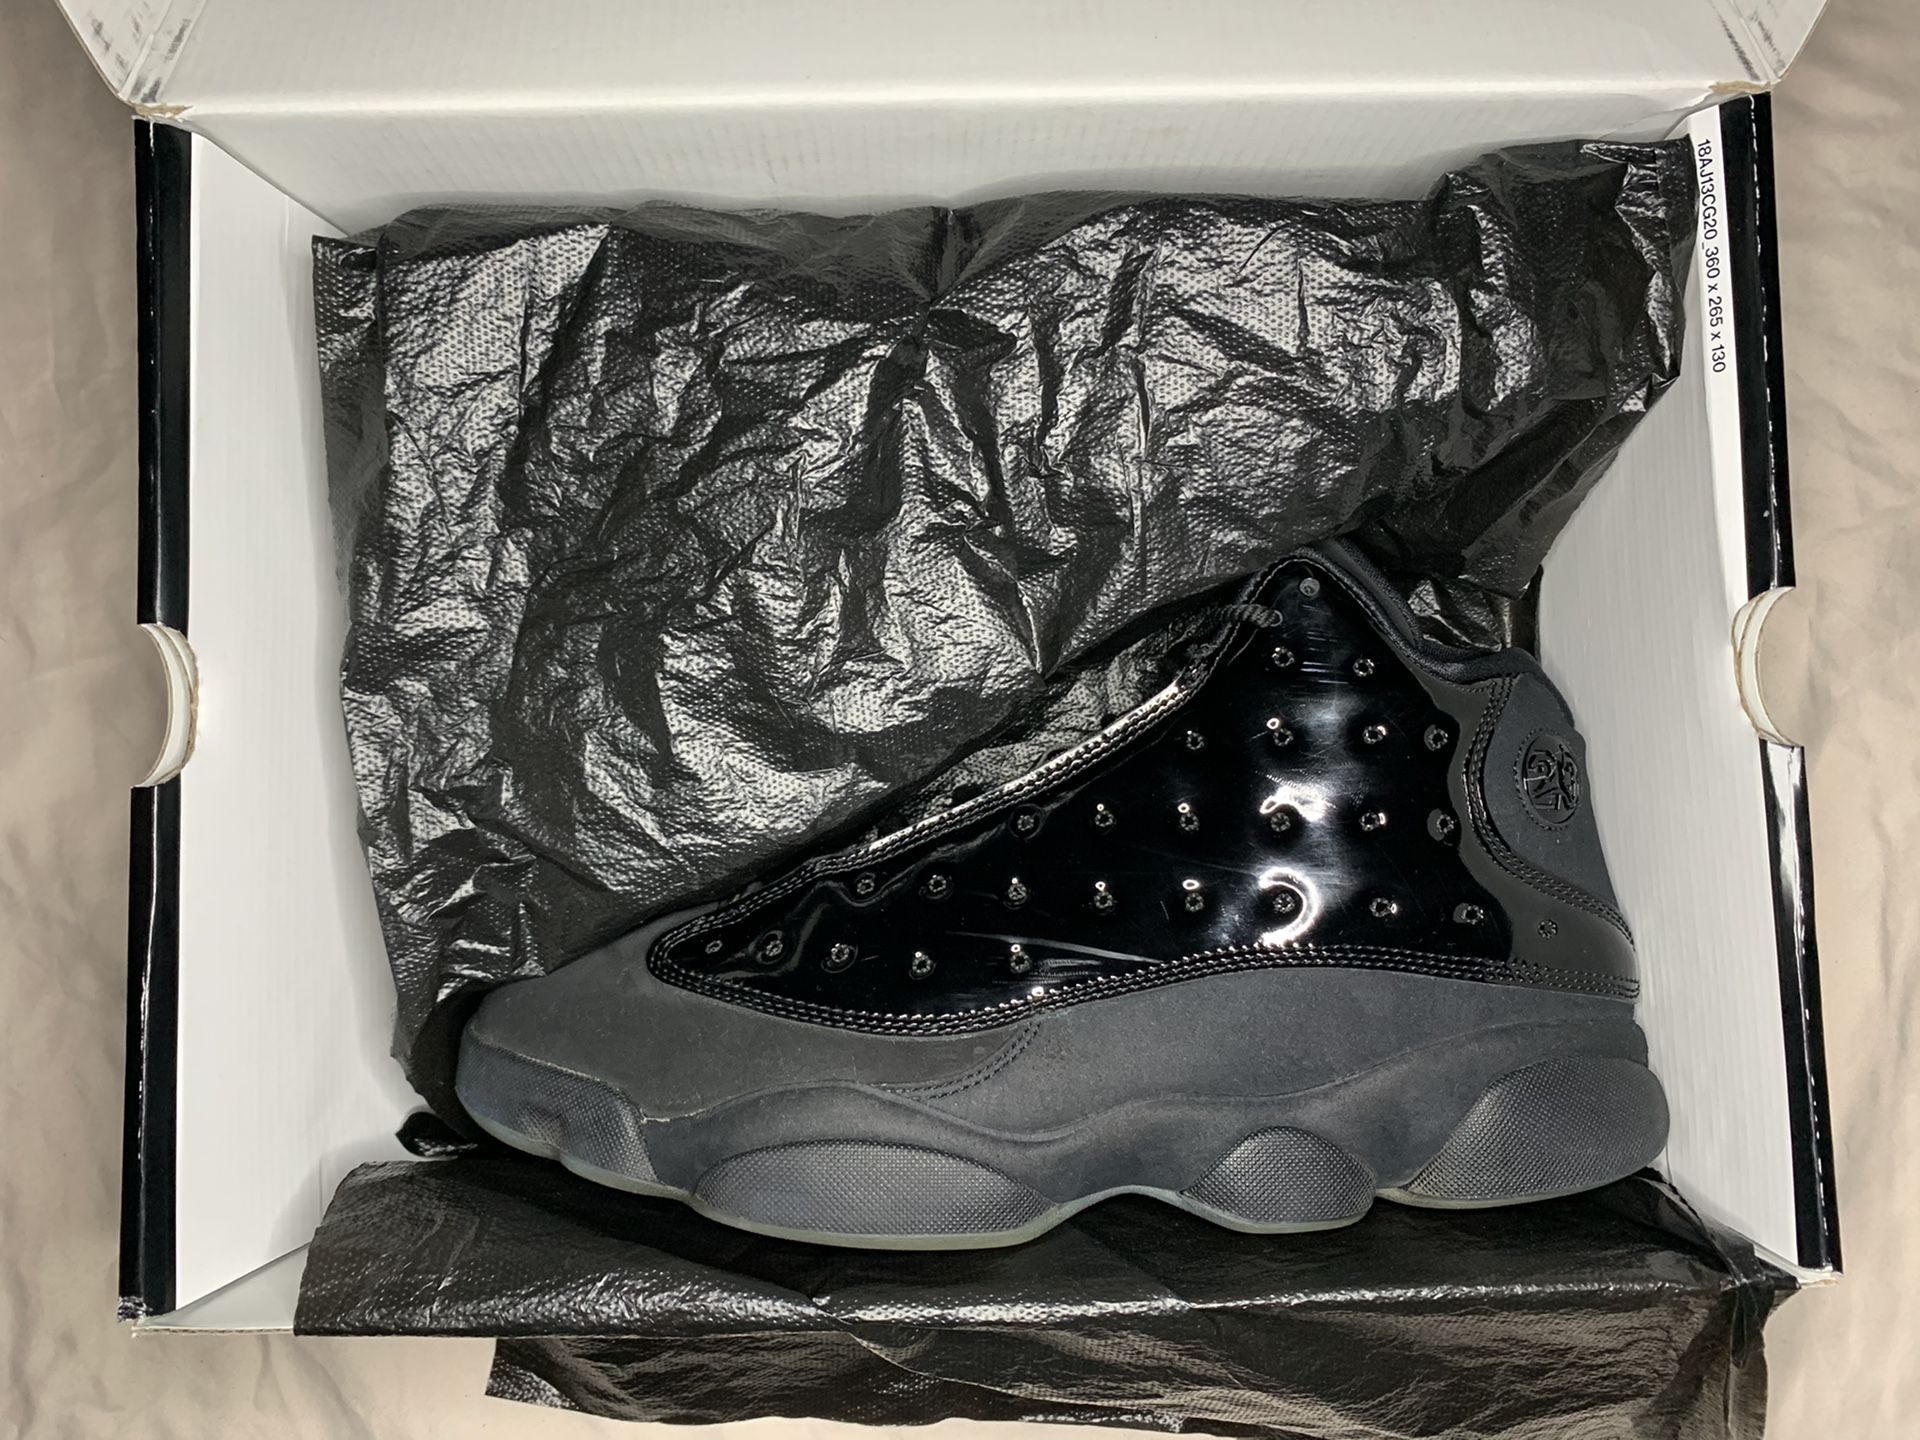 Cap and Gown Jordan 13s size 12